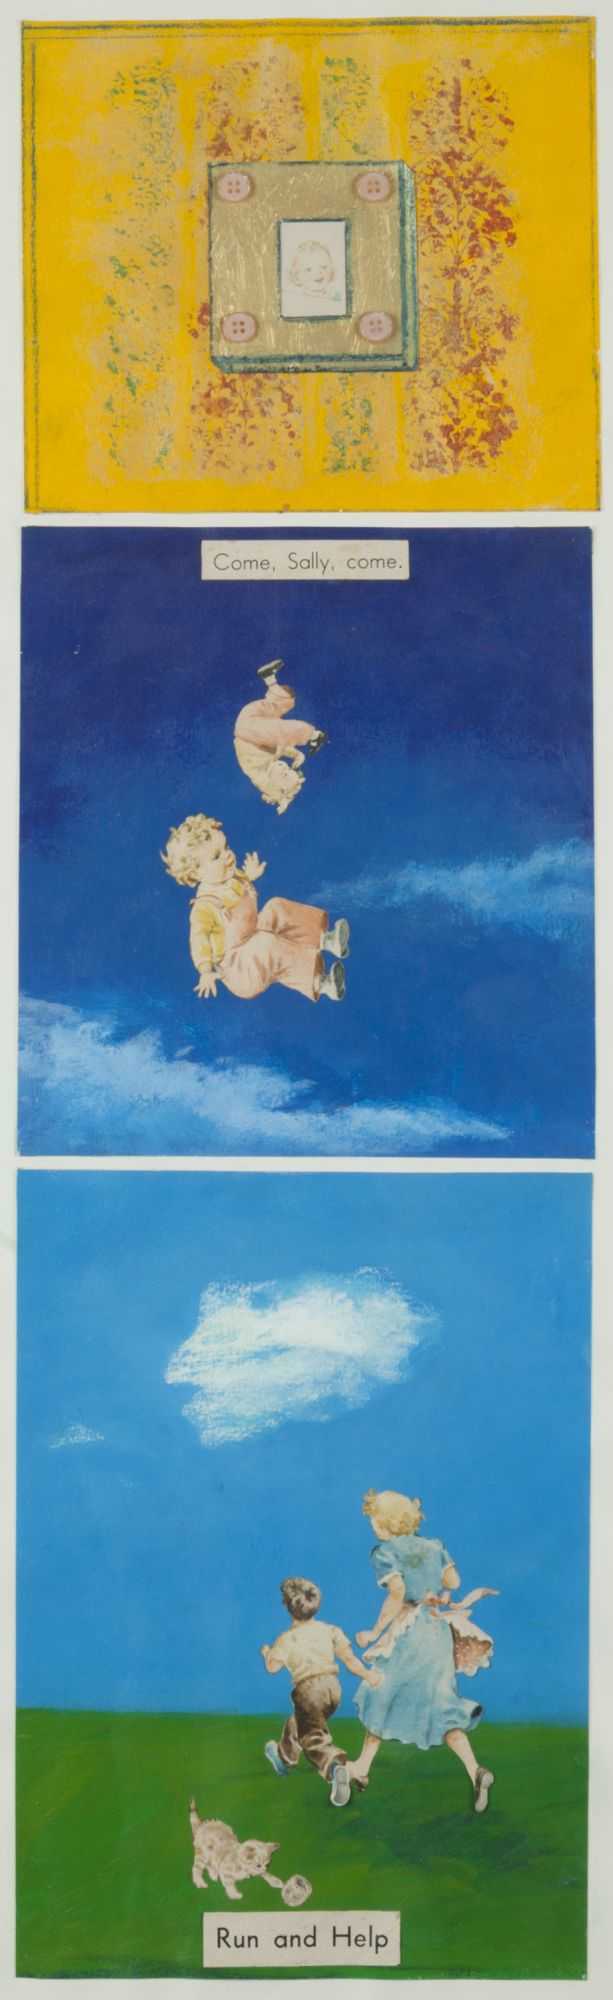 Collage By W. Perry Barton: The Baby Sally Ascending Into Heaven At Childs Gallery